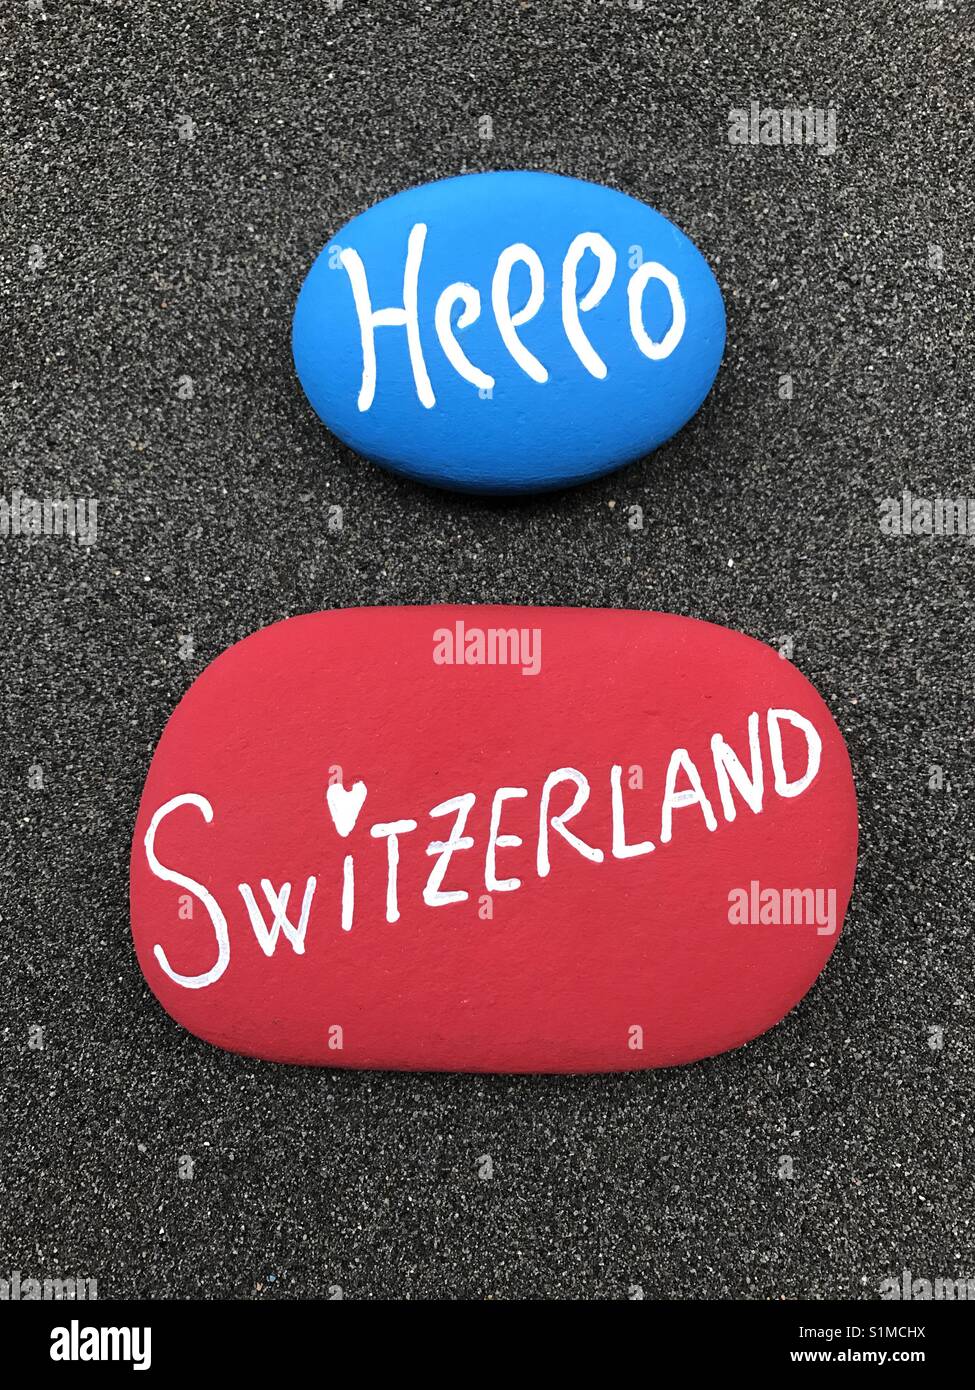 Hello Switzerland with carved and colored stones over black volcanic sand Stock Photo